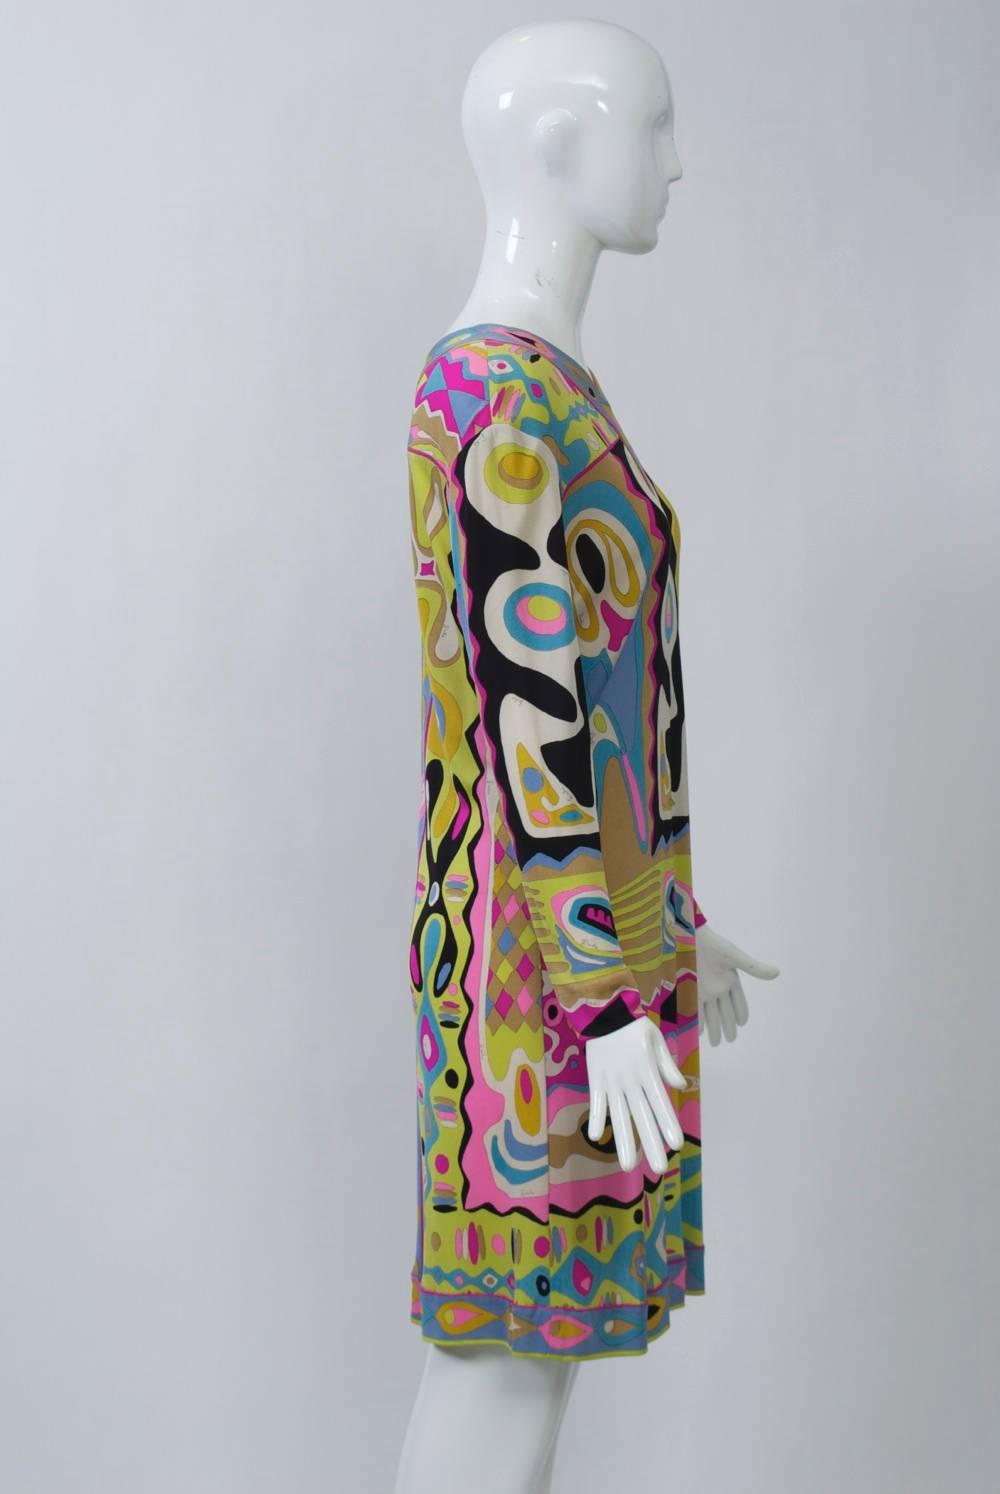 Iconic vintage Pucci dress of silk knit jersey in vivid colors features a bordered V neck and hem, and long sleeves. Marked size 14, probably equivalent to a contemporary size 8-10. Excellent condition. 